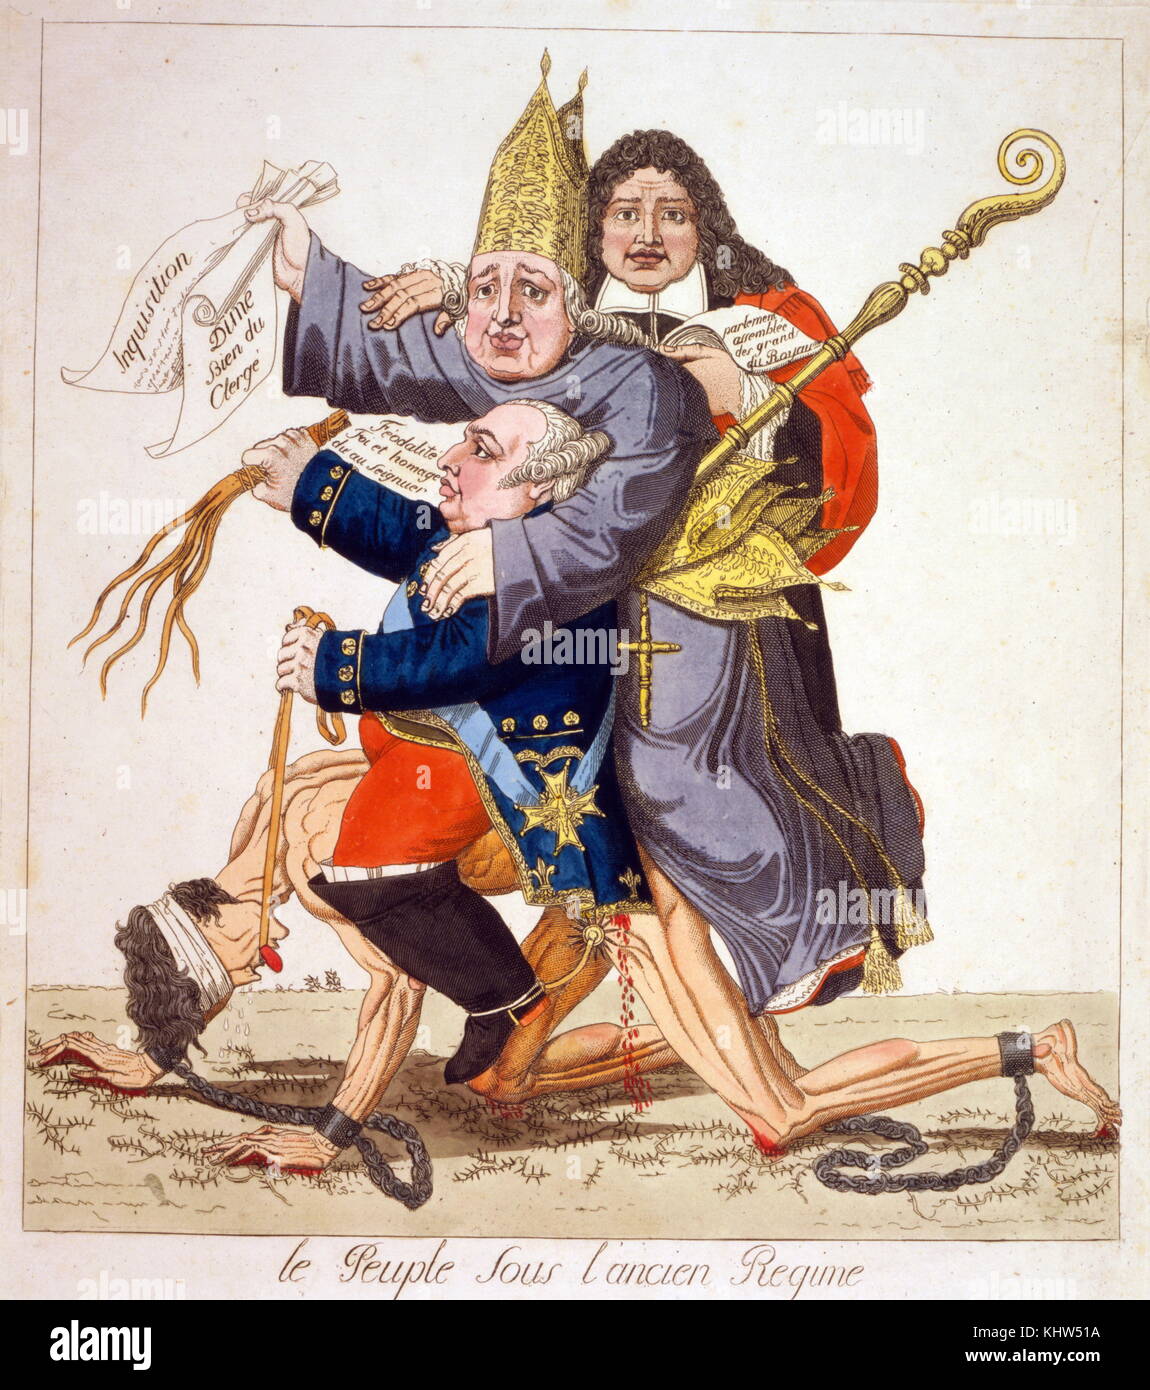 Cartoon titled 'Le peuple sous l'ancien Regime'. The cartoon depicting King Louis XVI, a bishop and a member of the aristocracy riding on the back of a man, representing the people, who's blindfolded and in chains, forced to crawl on his hands and knees. Dated 19th Century Stock Photo